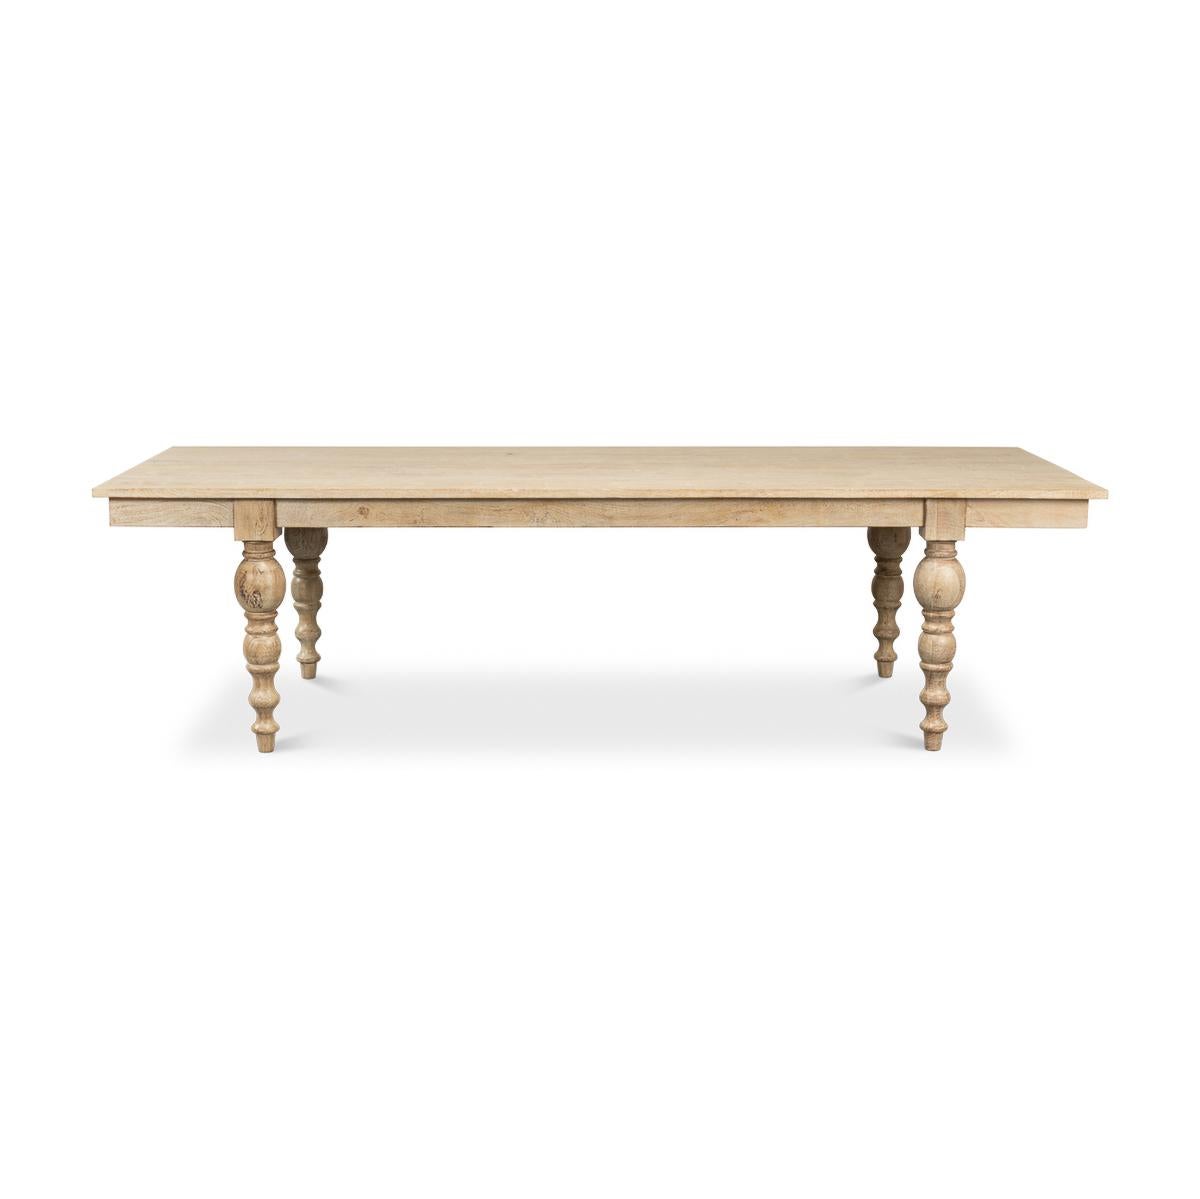 Organic Natural Dining table with mango wood in our sienna finish, with bold, turned and tapered legs.

Dimensions: 110